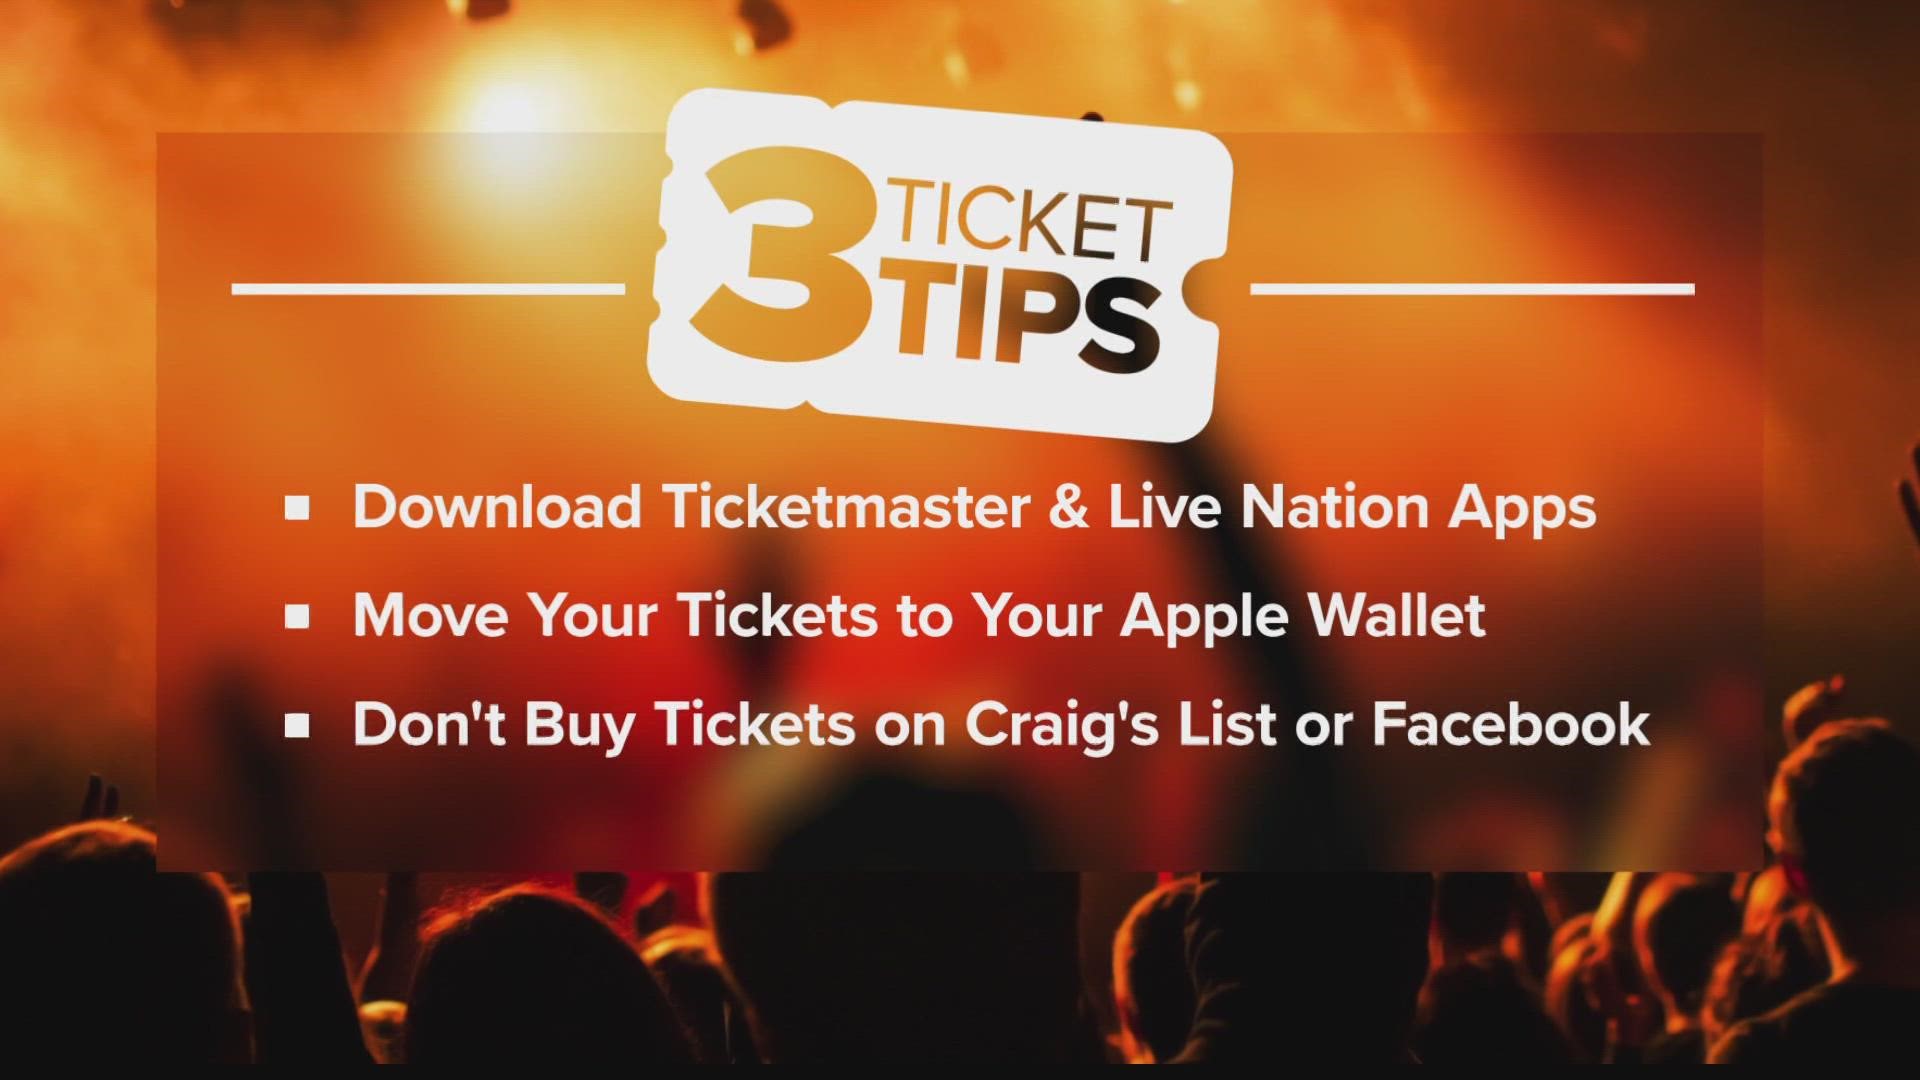 Carlos Diaz talked with Kiros Sistevaris of Circle City Tickets about how to have the best ticket experience as people head back to concerts this summer.